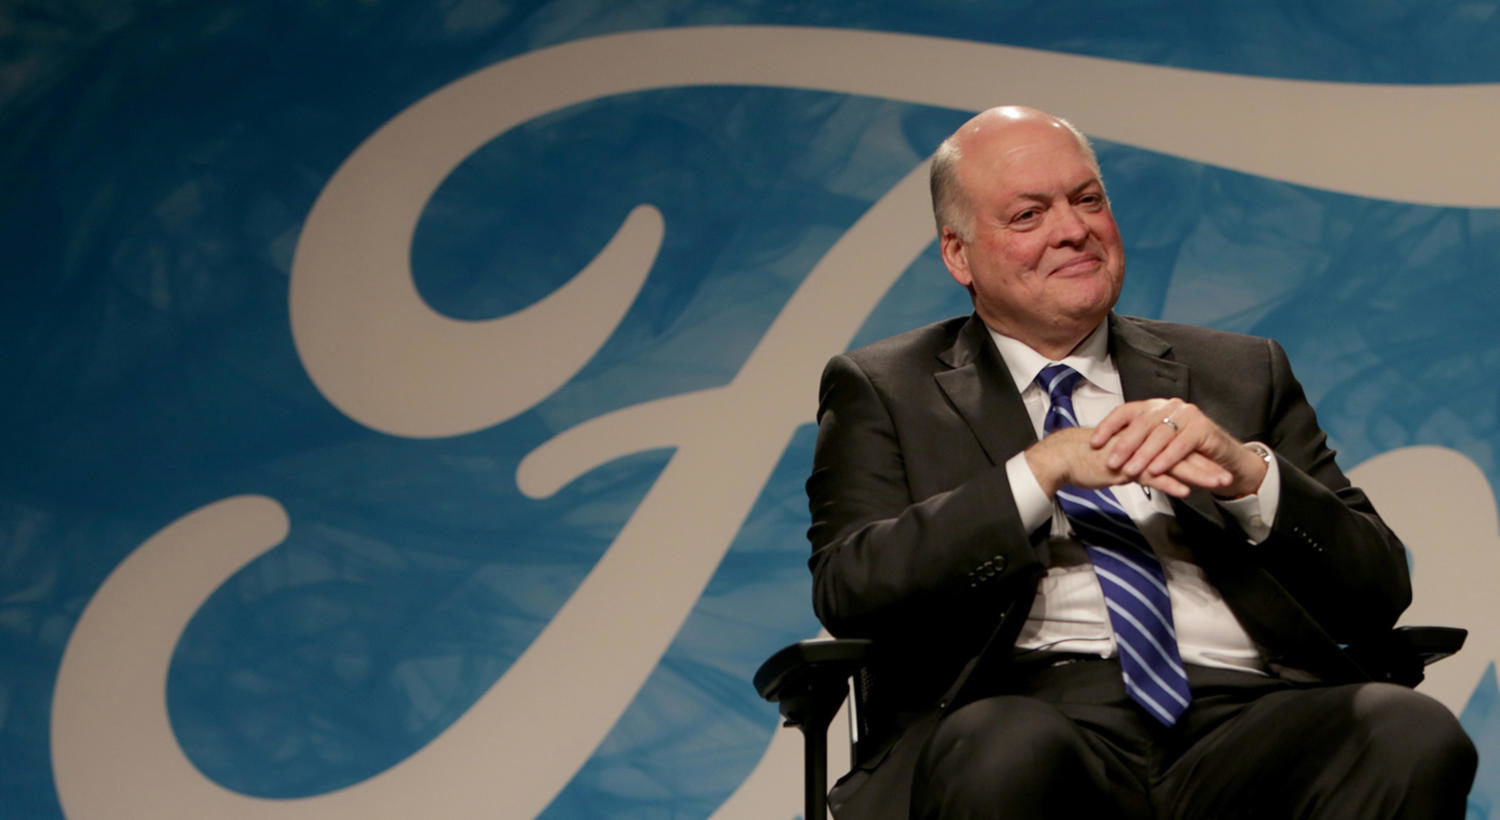 Ford Motor Company President and CEO, Jim Hackett, on Monday, May 22, 2017 at the Ford Motor Company World Headquarters in Dearborn, Mich. Ford said Wednesday it earned a profit of $2 billion during the second quarter. (Elaine Cromie/Detroit Free Press/TNS)